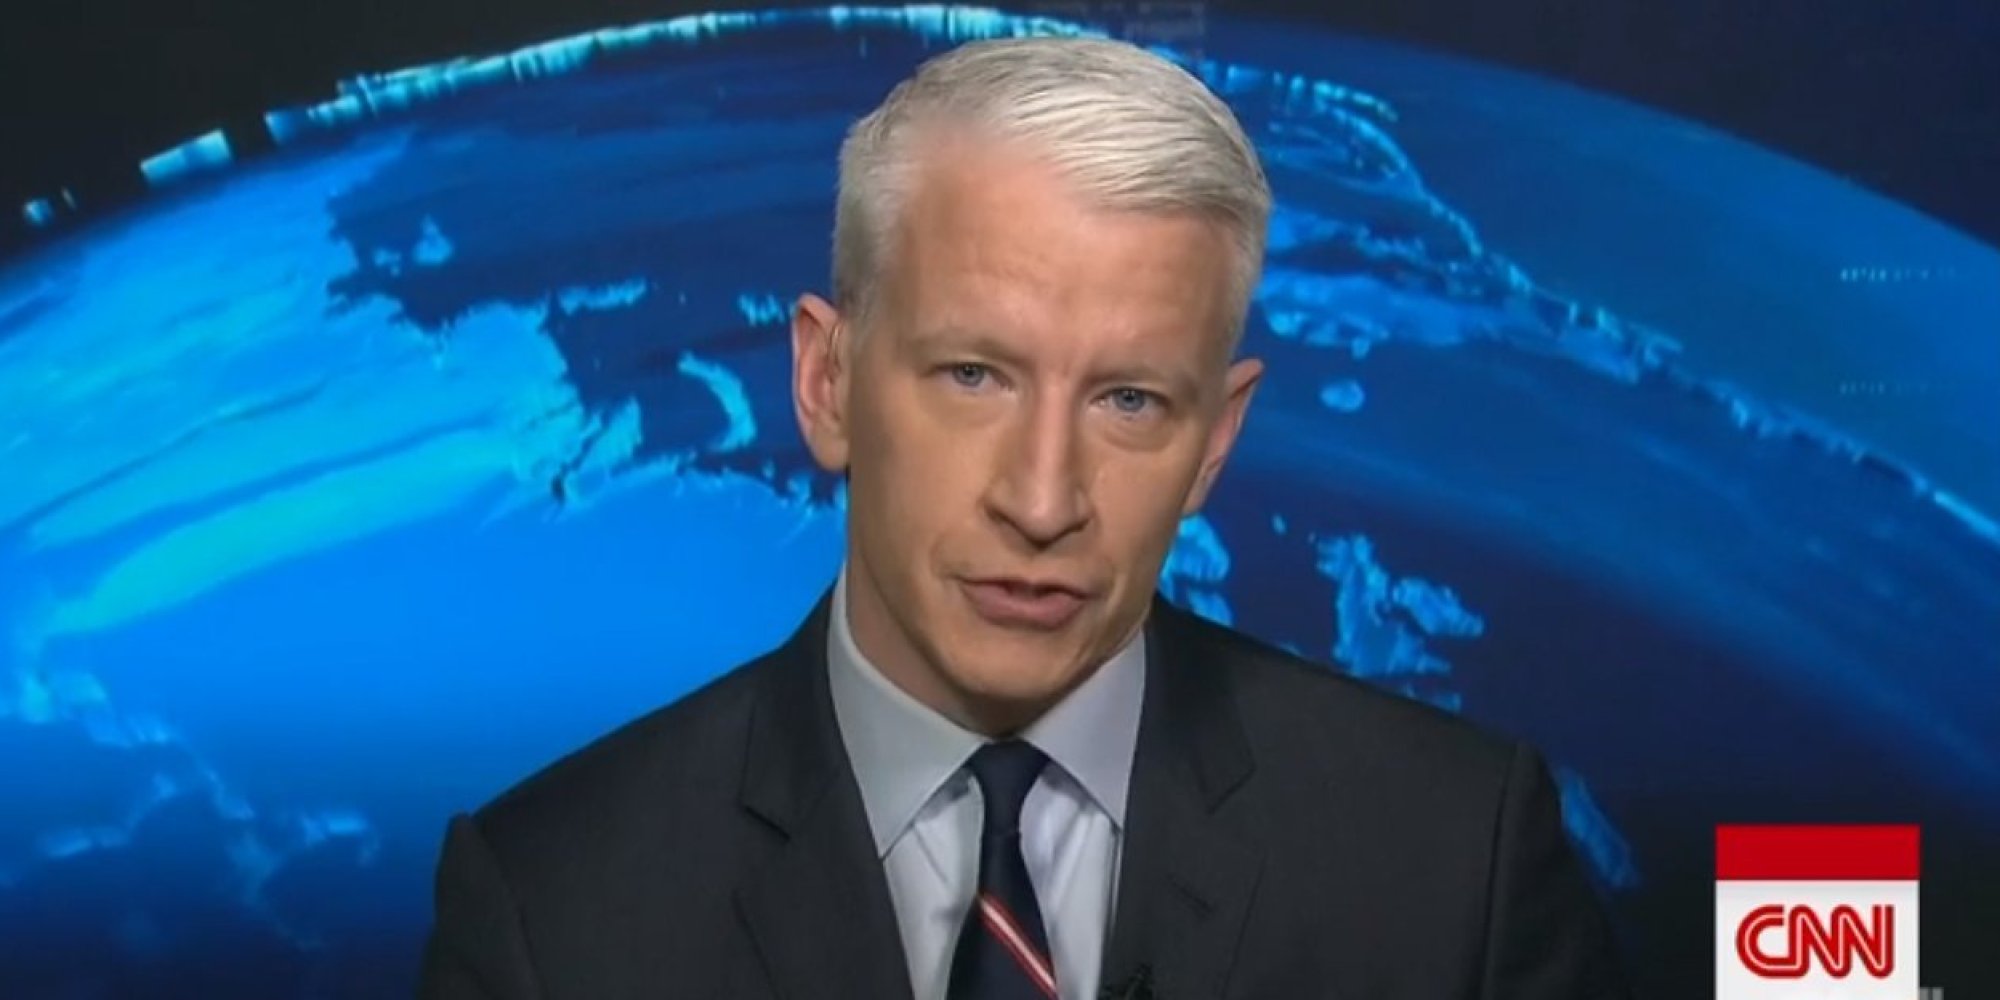 anderson-cooper-owns-up-to-no-go-zone-blunders-at-cnn-huffpost